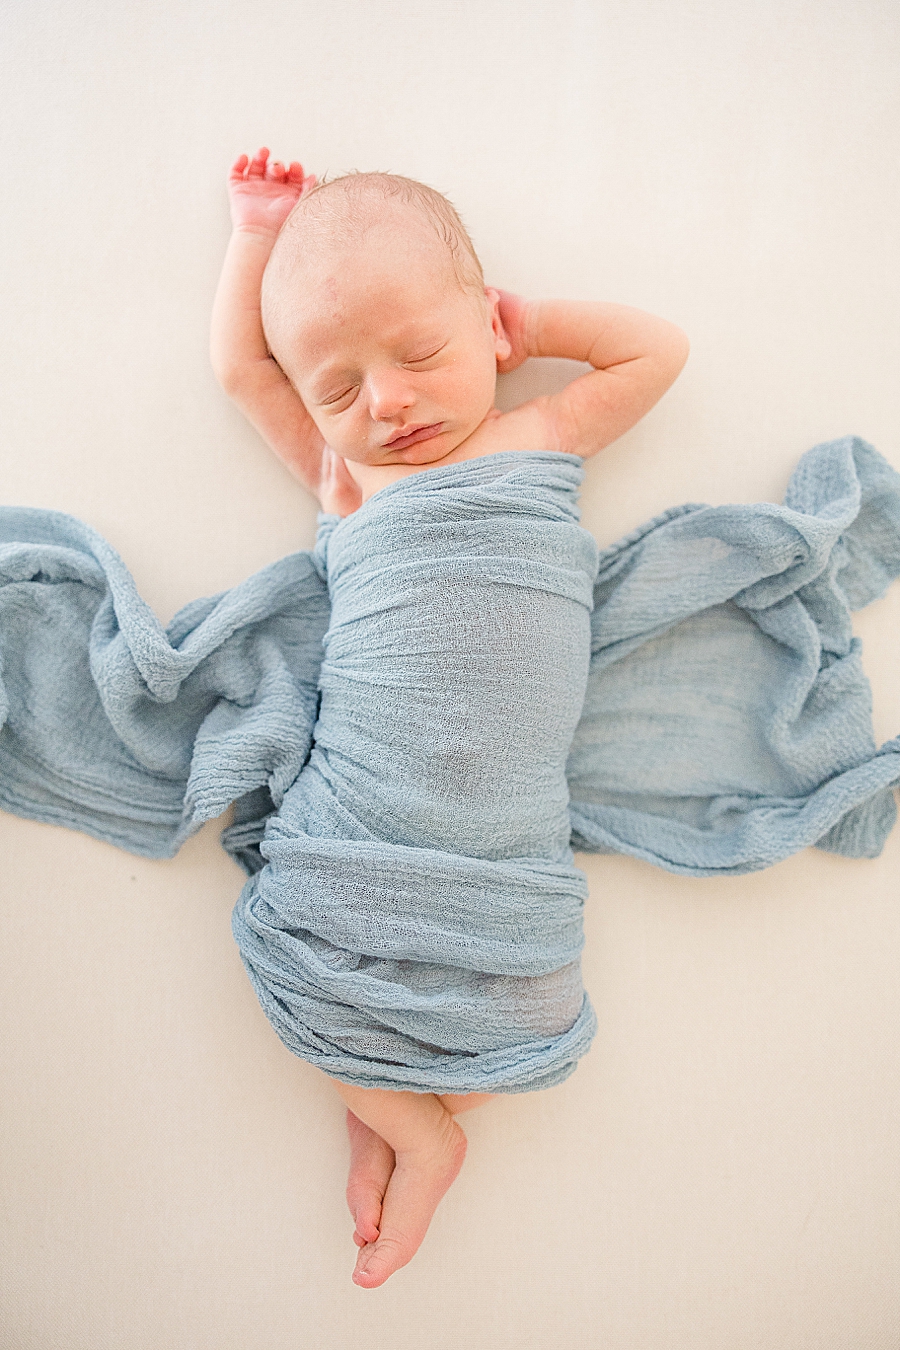 baby in blue swaddle stretching